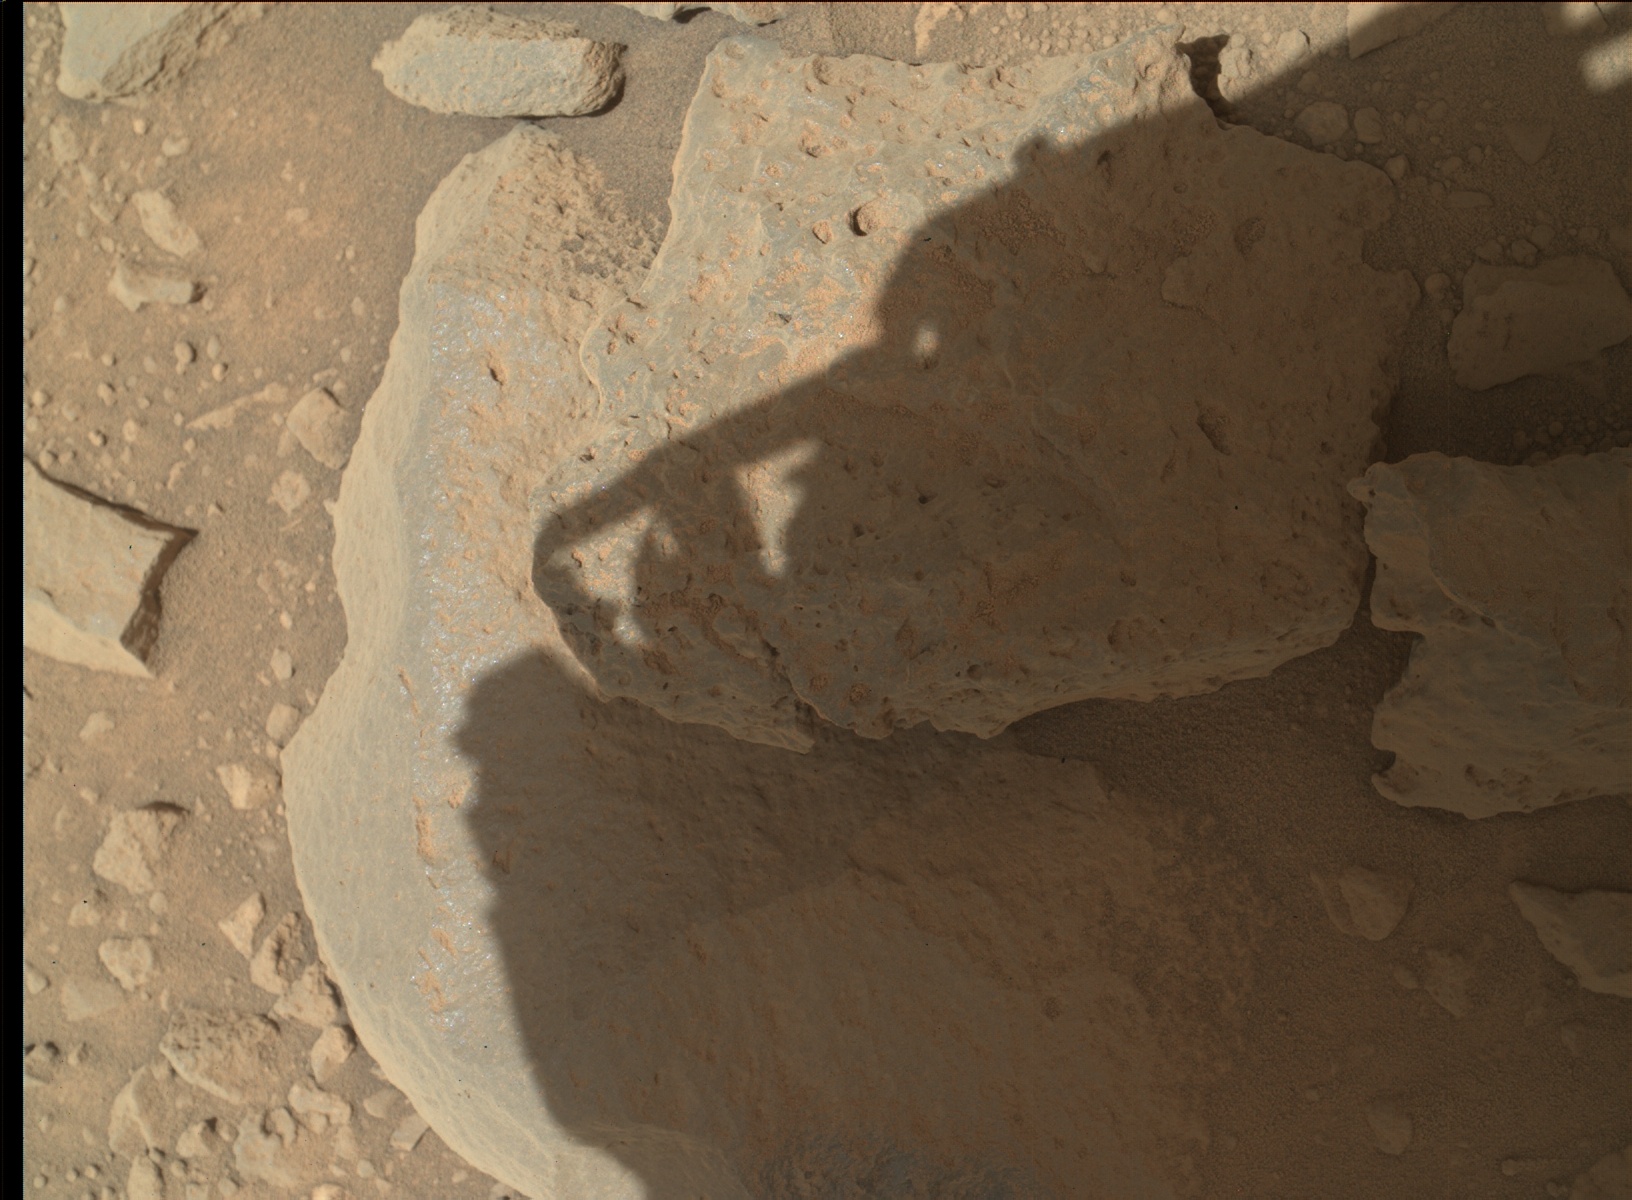 Nasa's Mars rover Curiosity acquired this image using its Mars Hand Lens Imager (MAHLI) on Sol 503